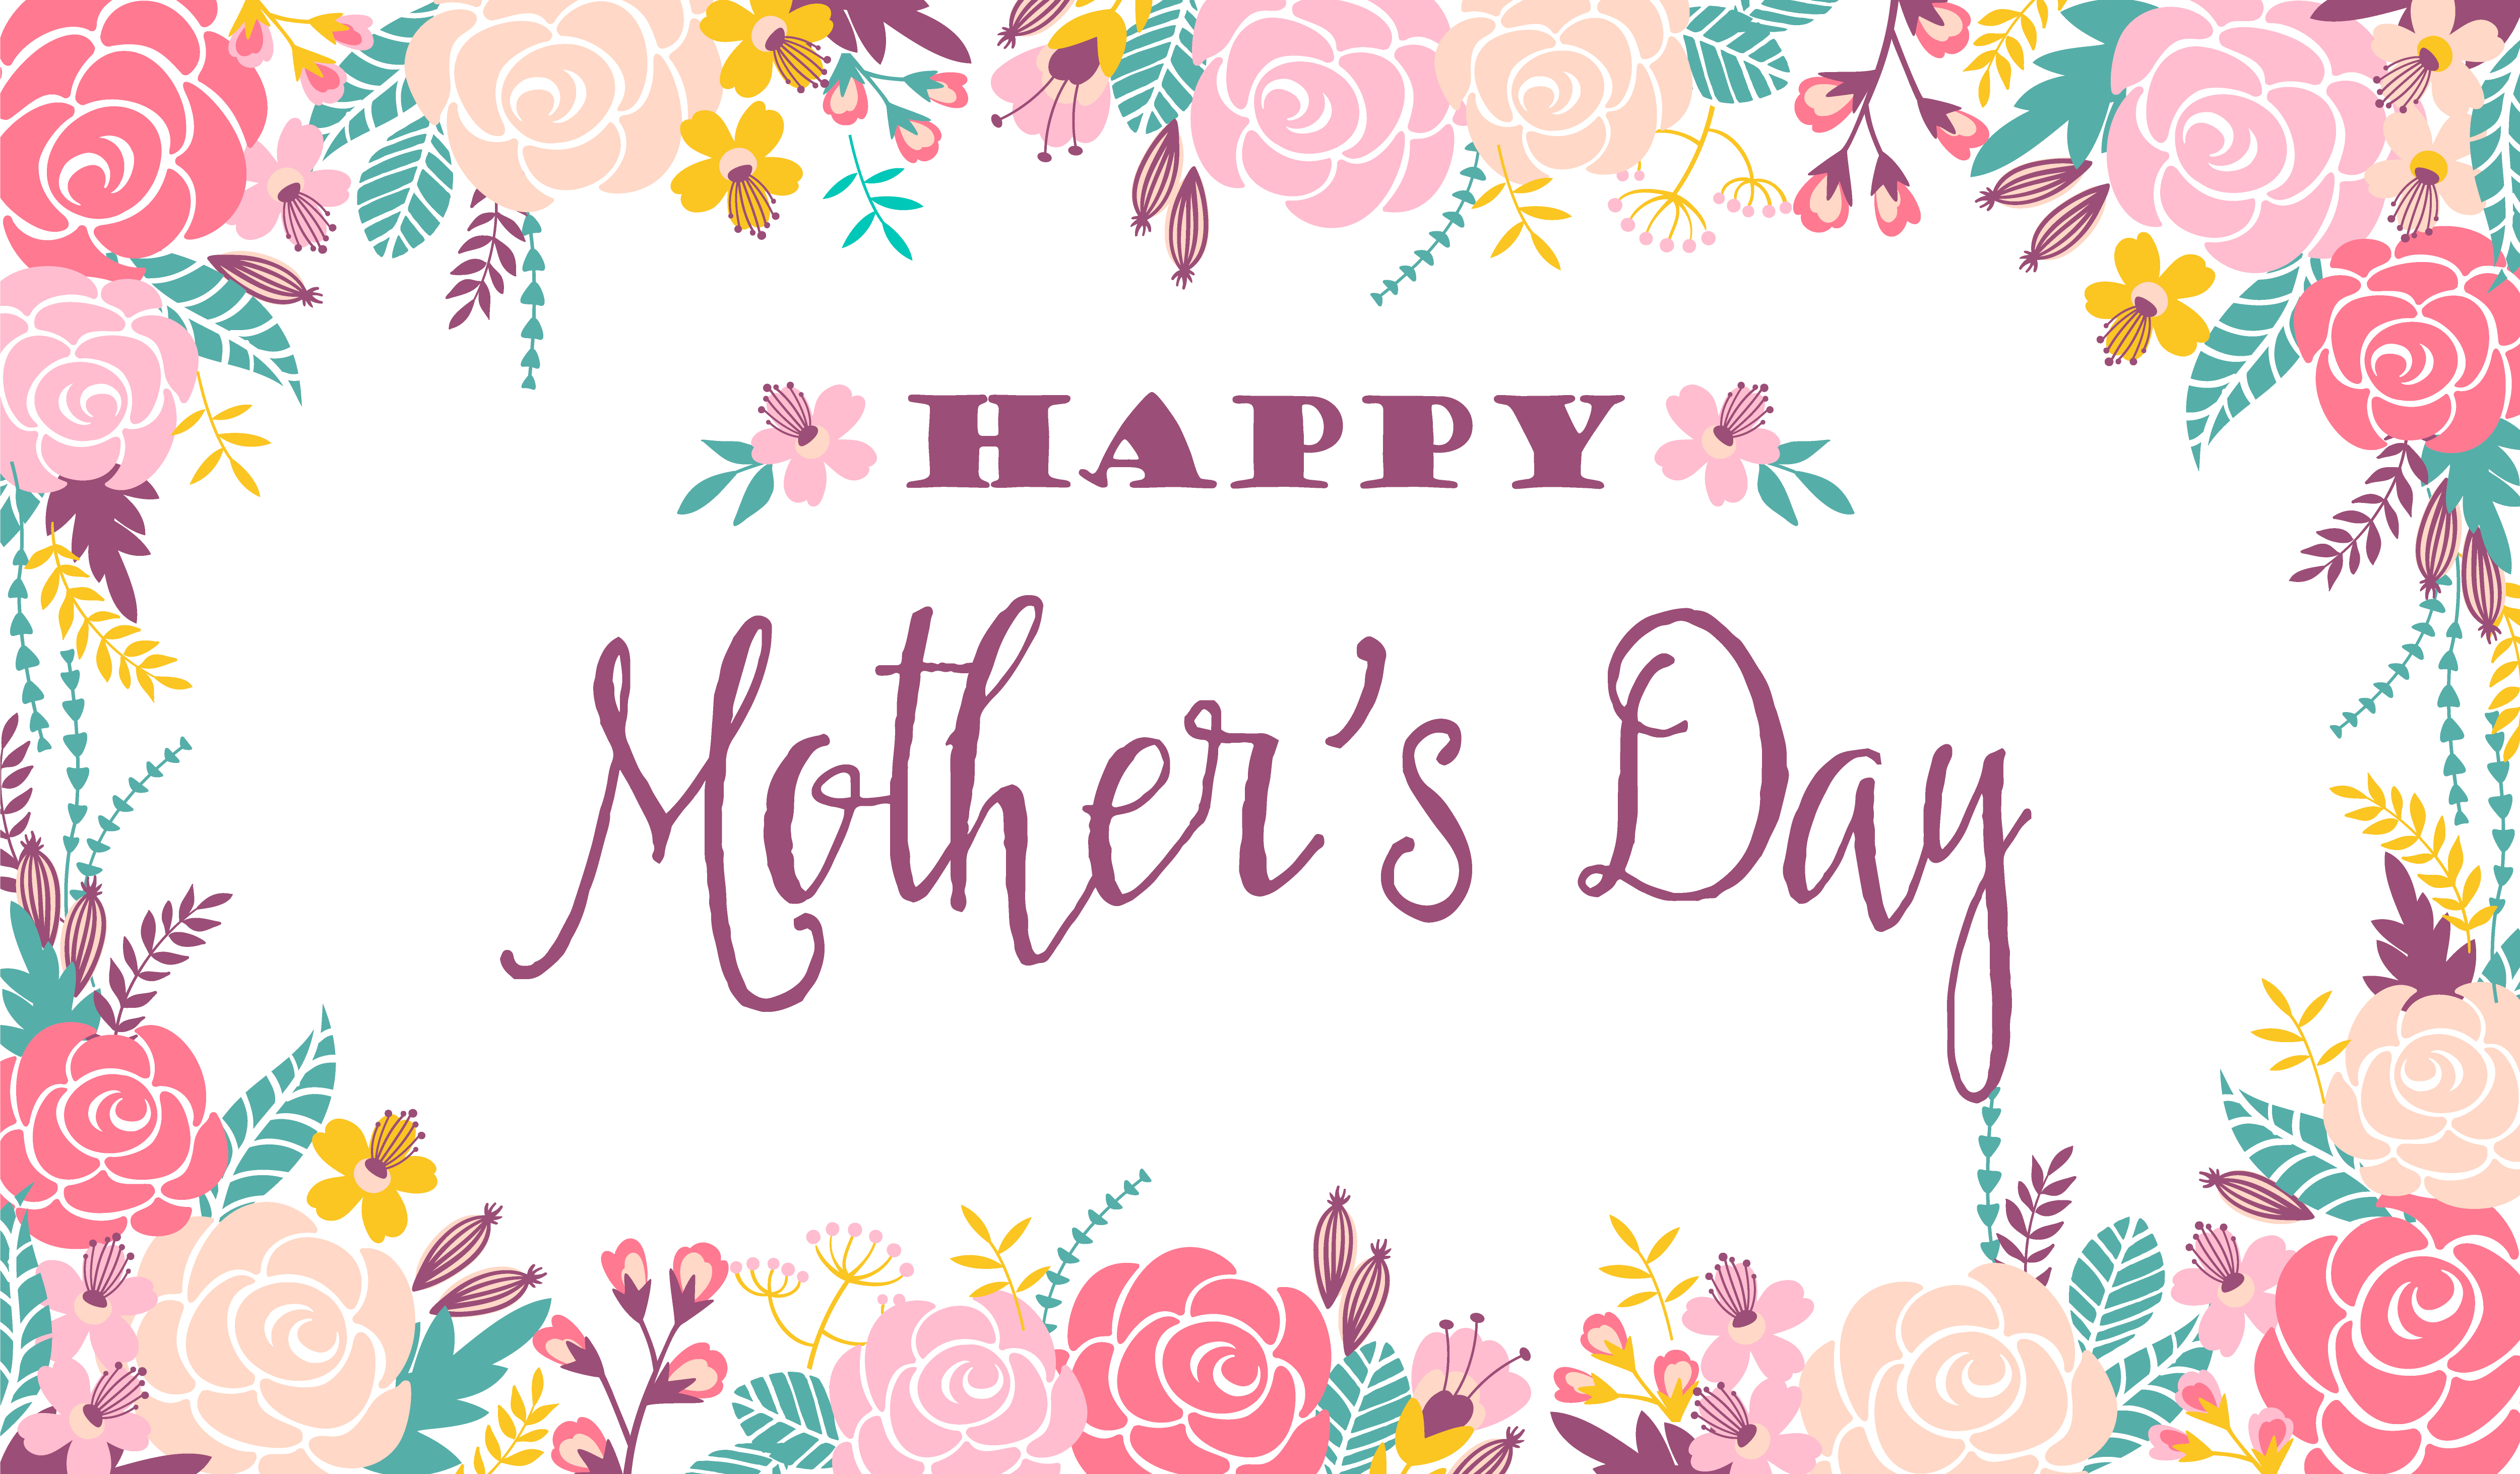 happy-mothers-day-lettering-greeting-banner-with-flowers-293979-vector